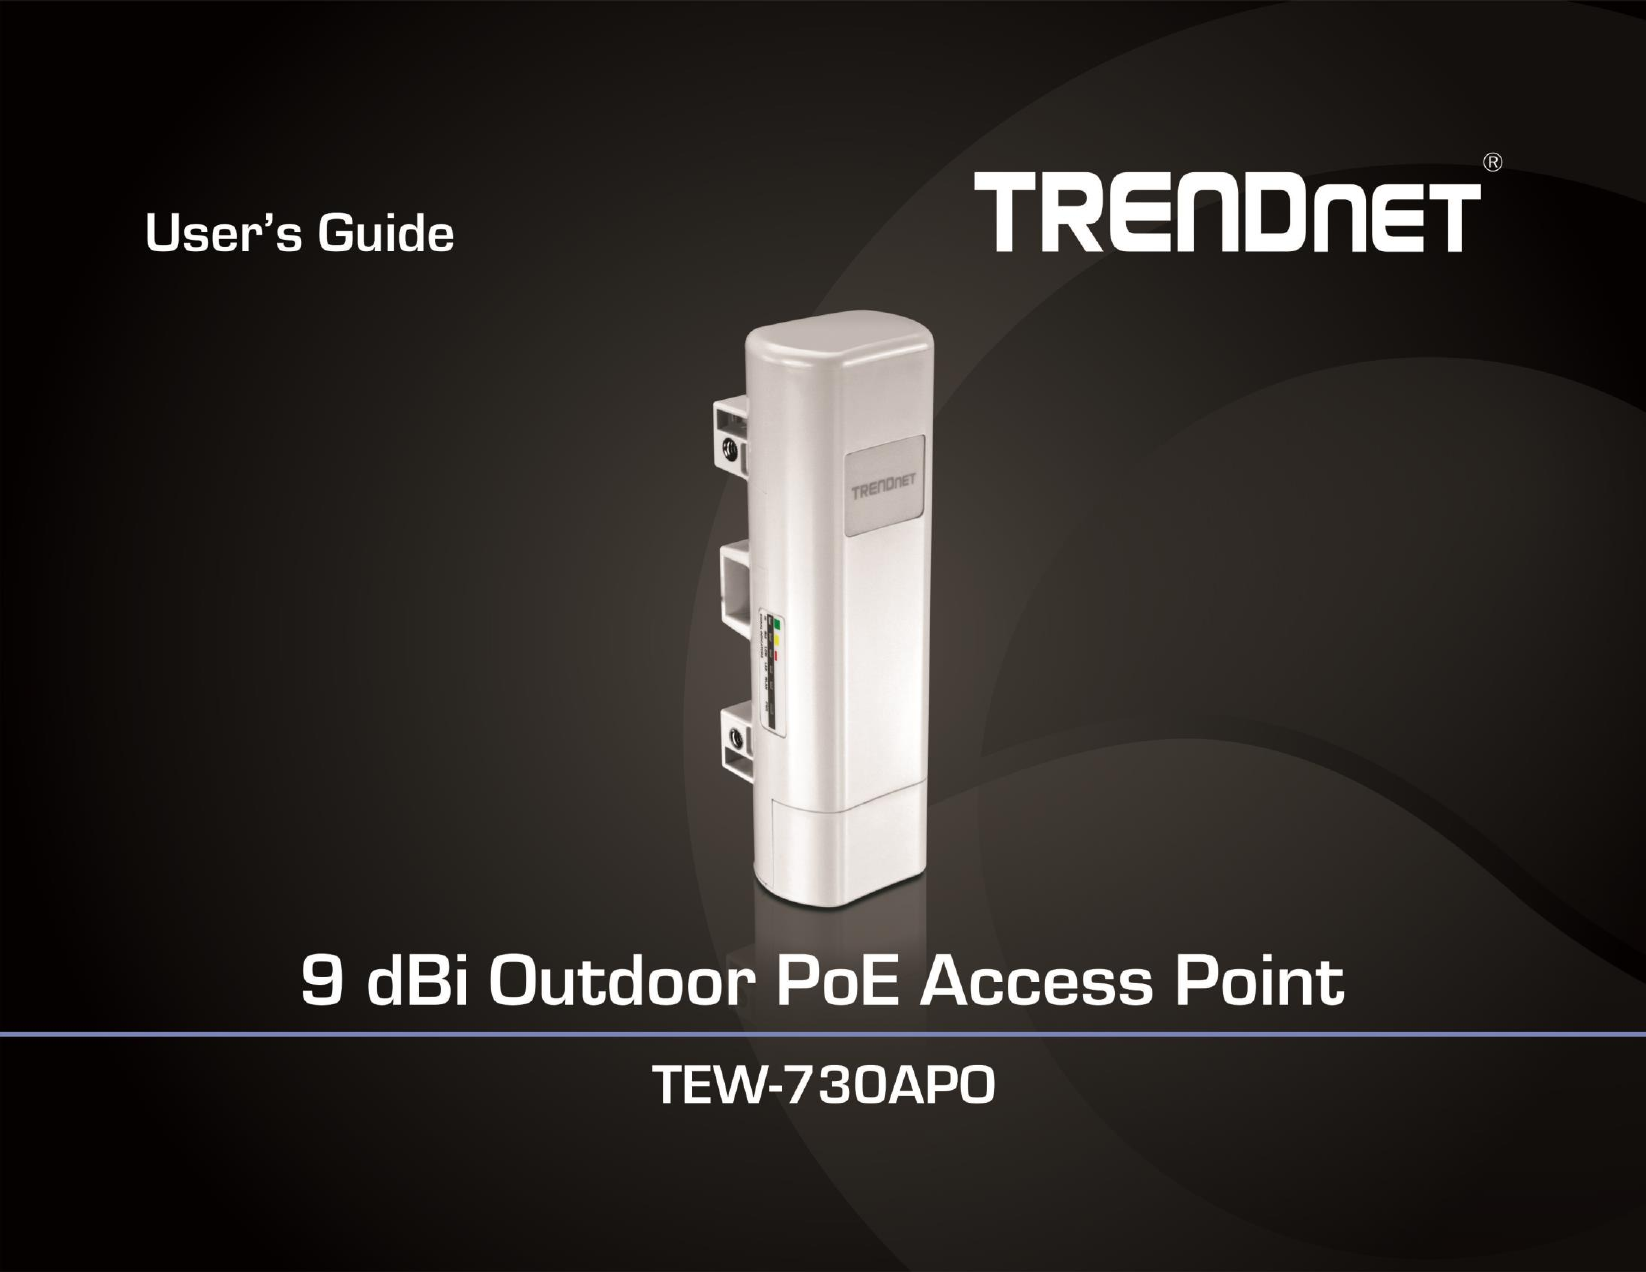                    TRENDnet User’s Guide Cover Page  